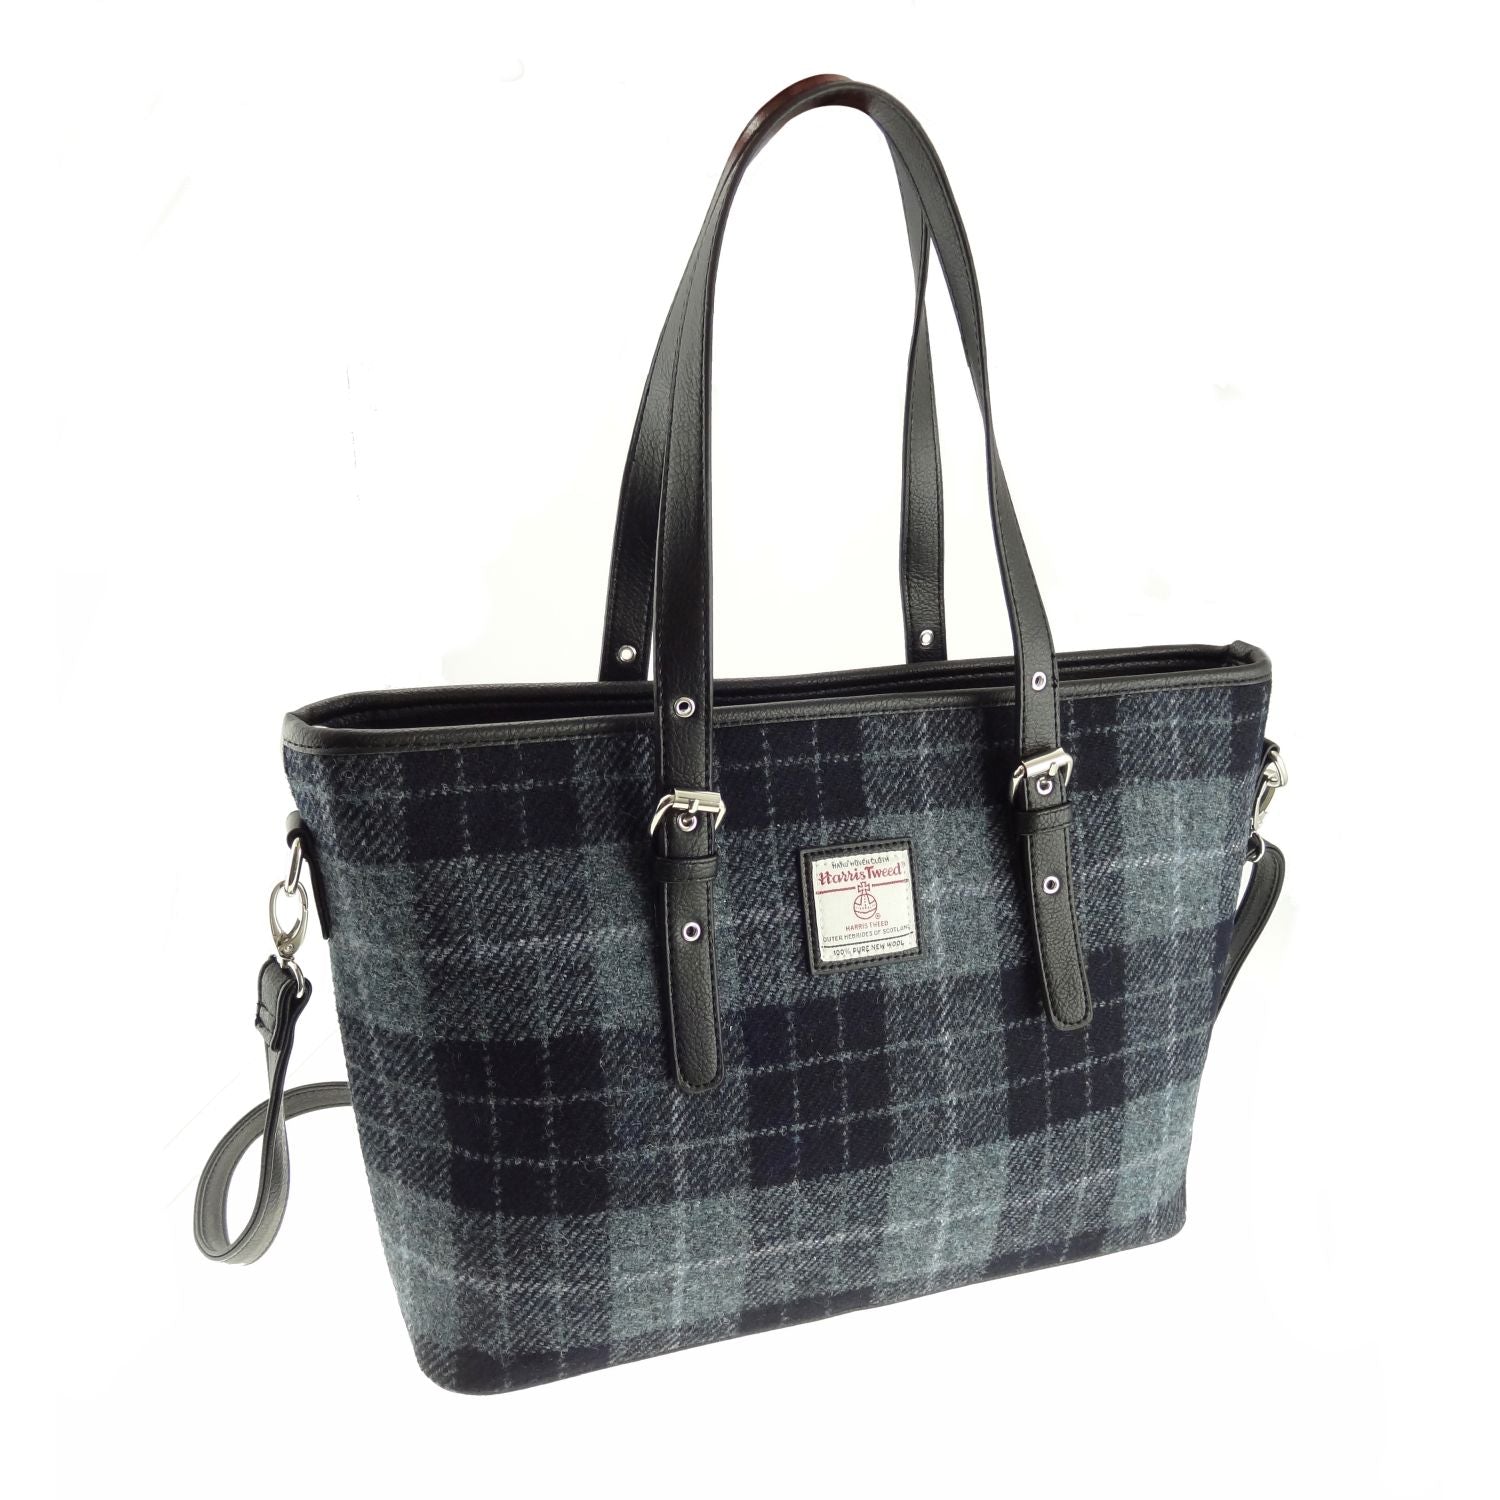 Grey and Black Scottish Harris Tweed Women's Large Tote Bag with Shoulder Strap Glen Appin of Scotland